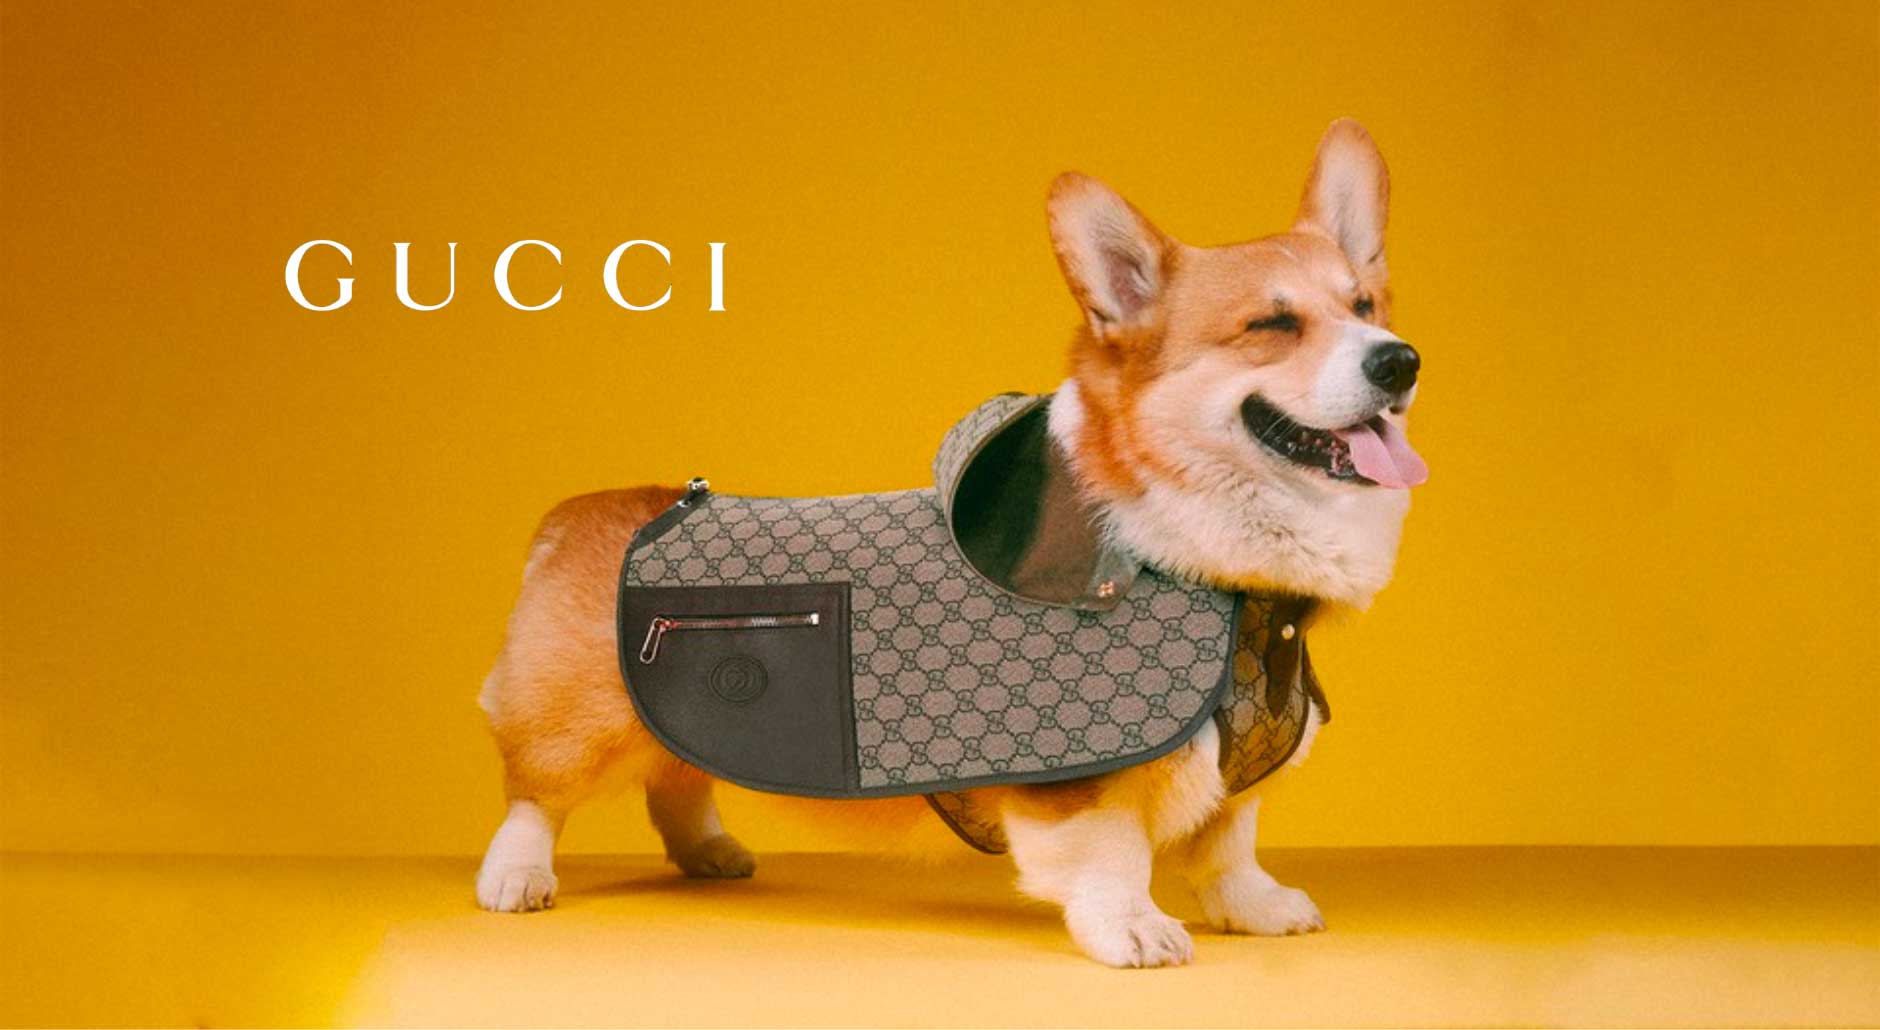 How And Where To Find Stylish Luxury Pet Accessories?